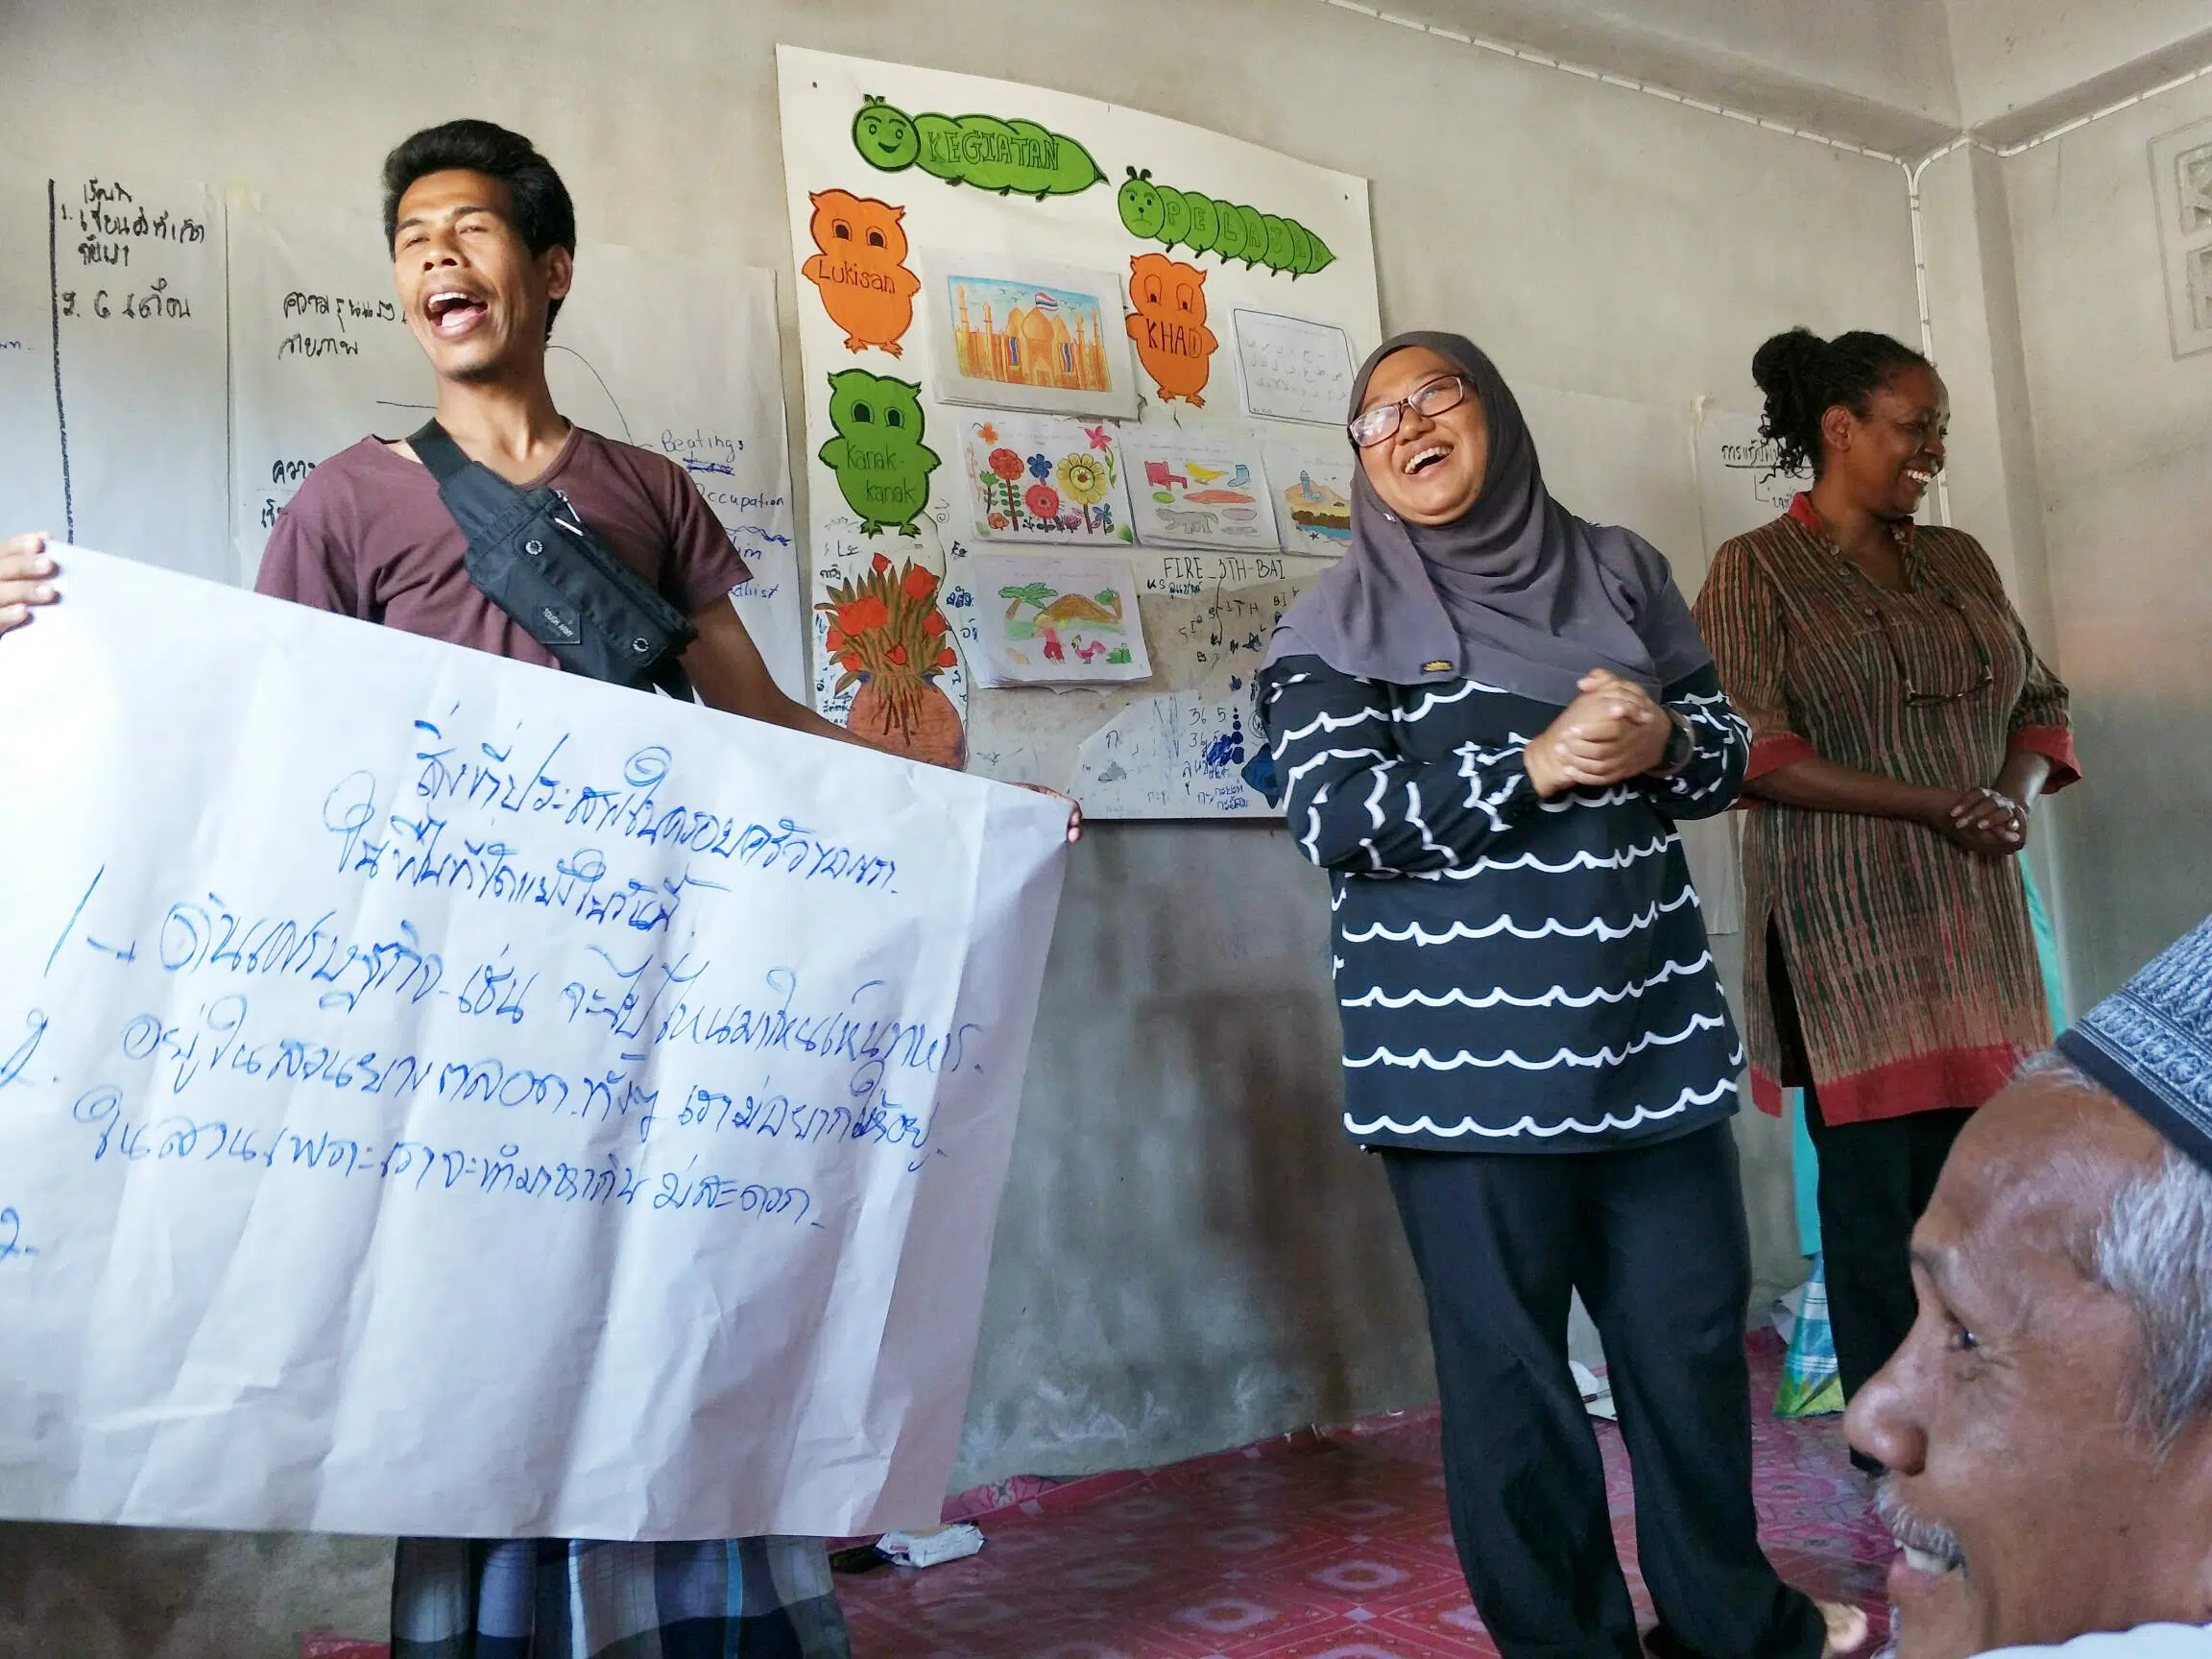 Two people singing and smiling holding a sign with Thai letters during a training in Southern Thailand. NP staff smiling next to two people.